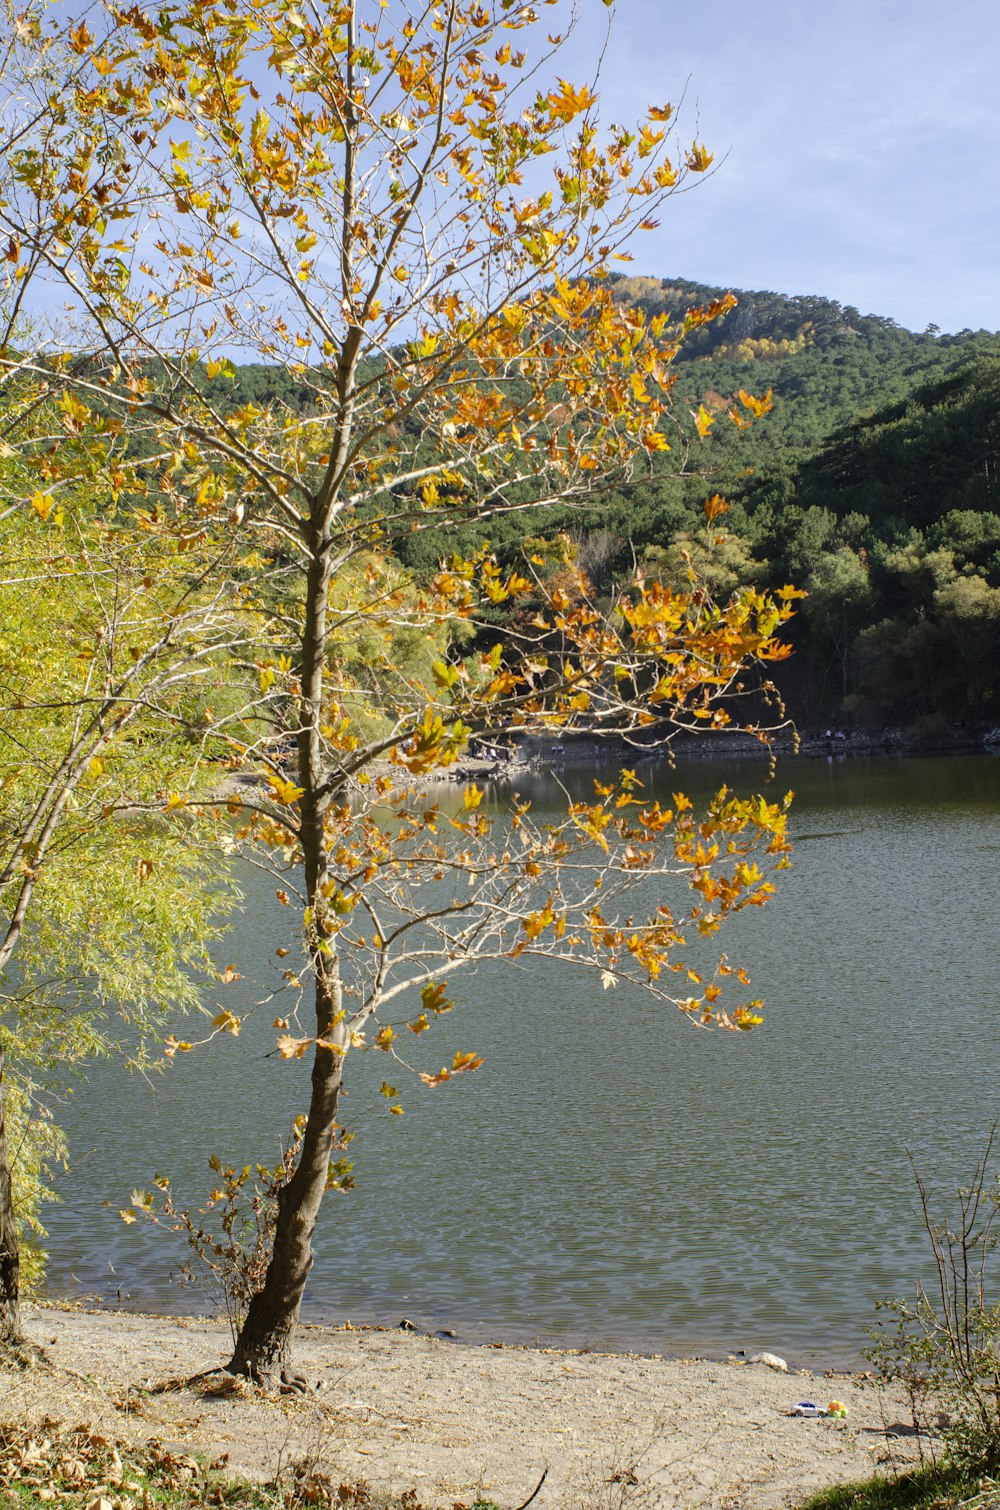 a tree with yellow leaves near a body of water